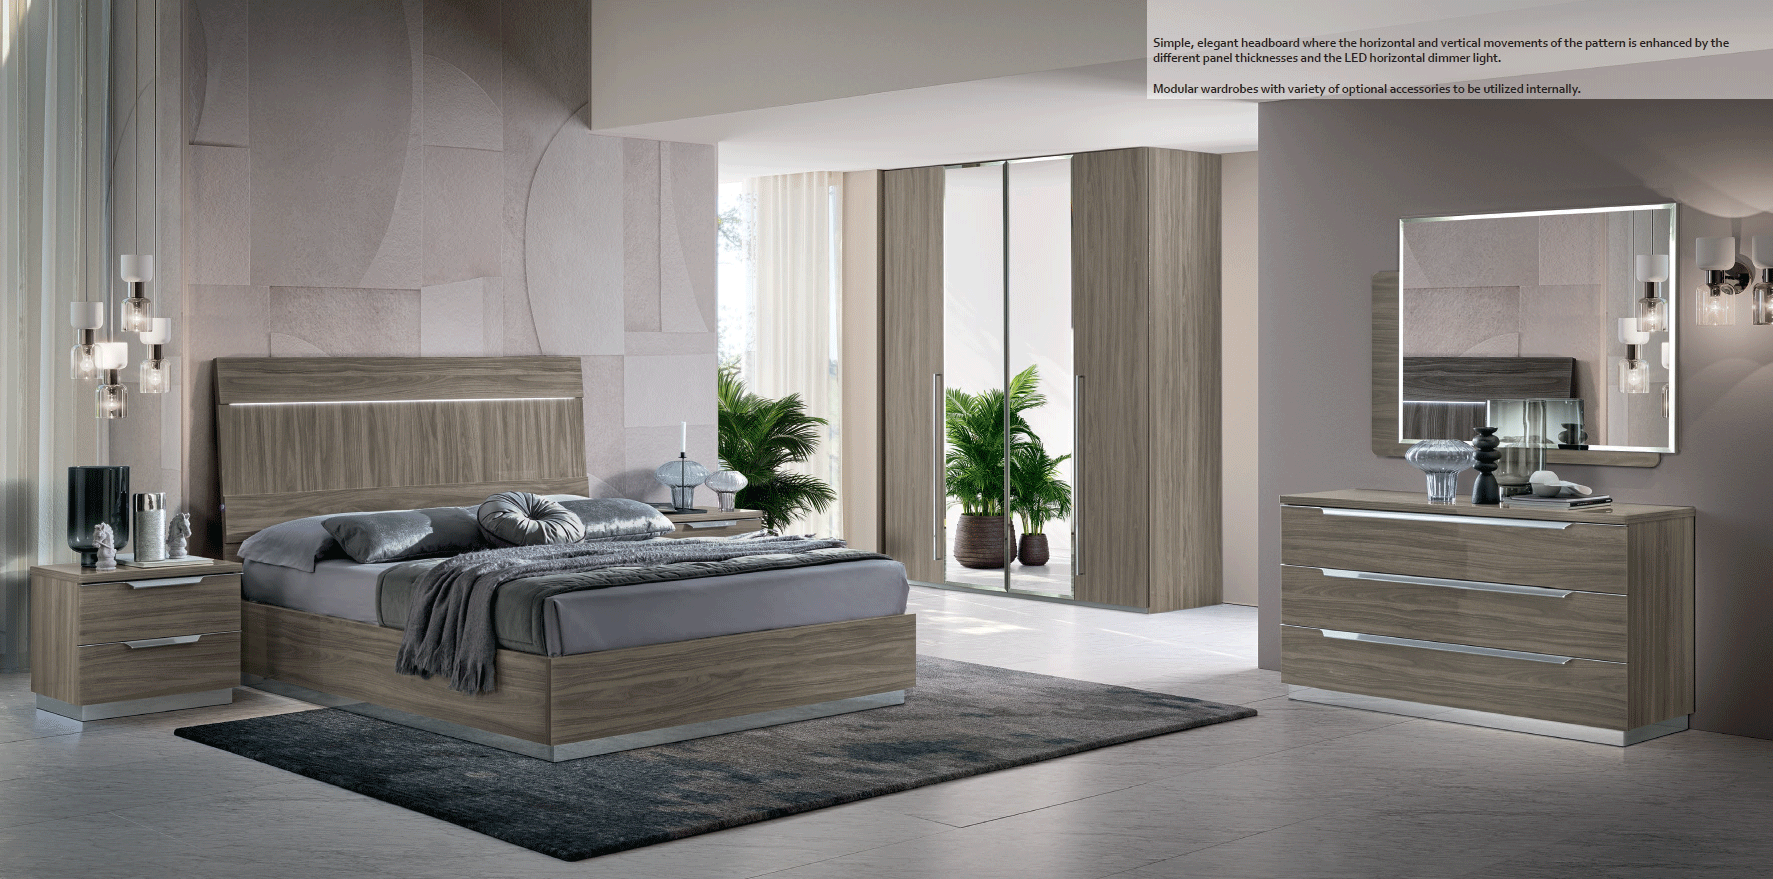 Bedroom Furniture Beds with storage Kroma Bedroom GREY Additional Items